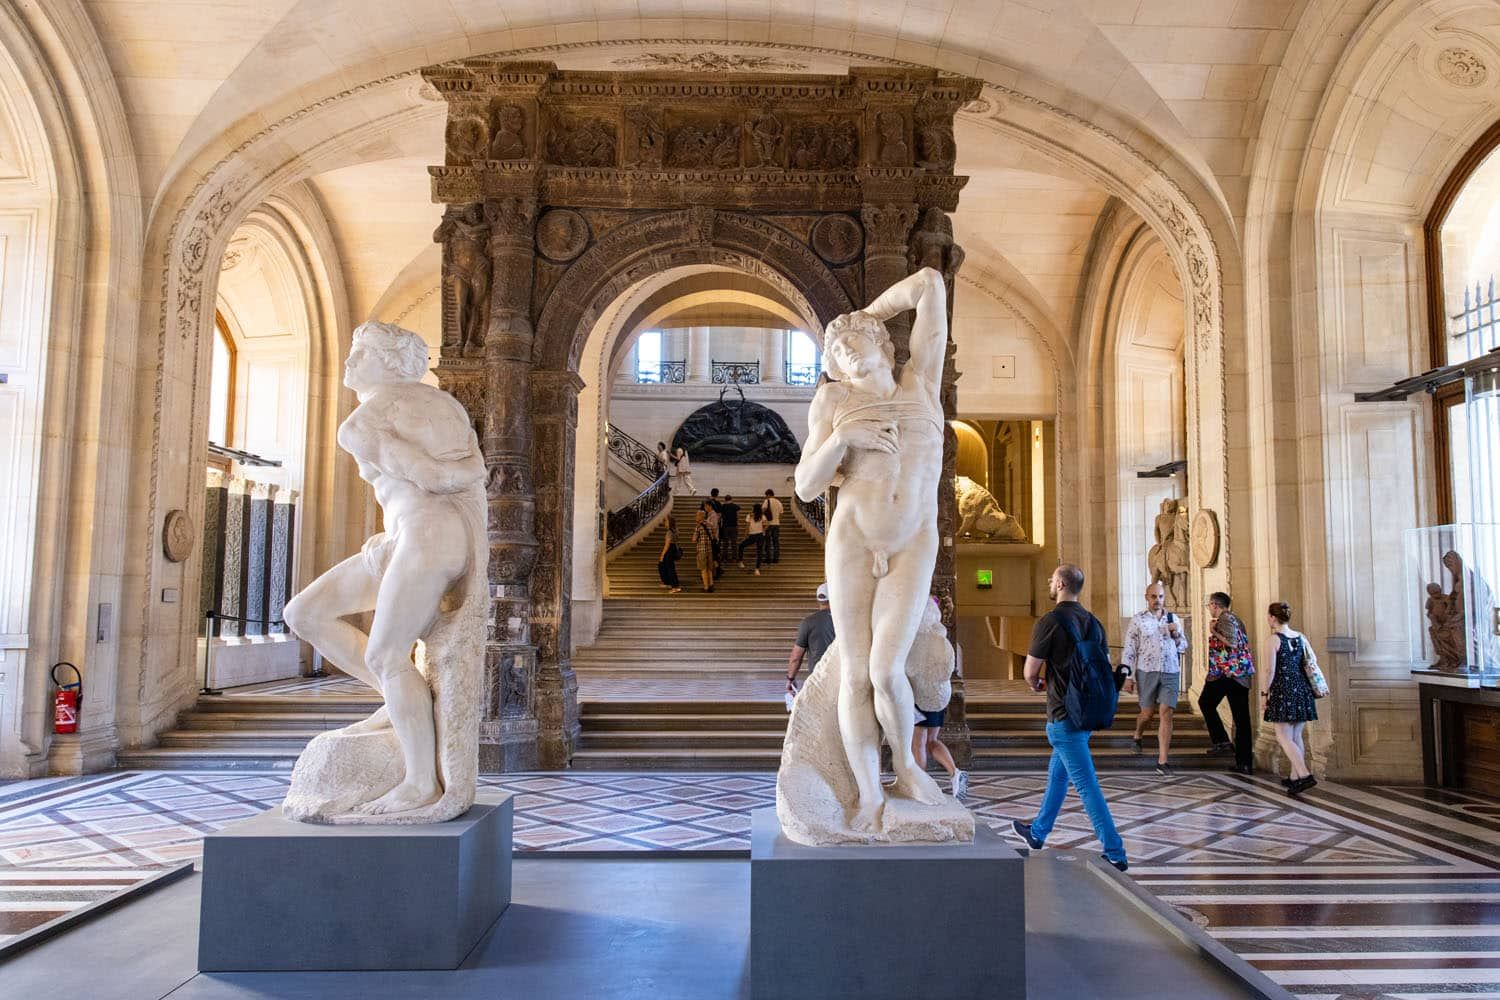 Michelangelos Slaves | How to visit the Louvre